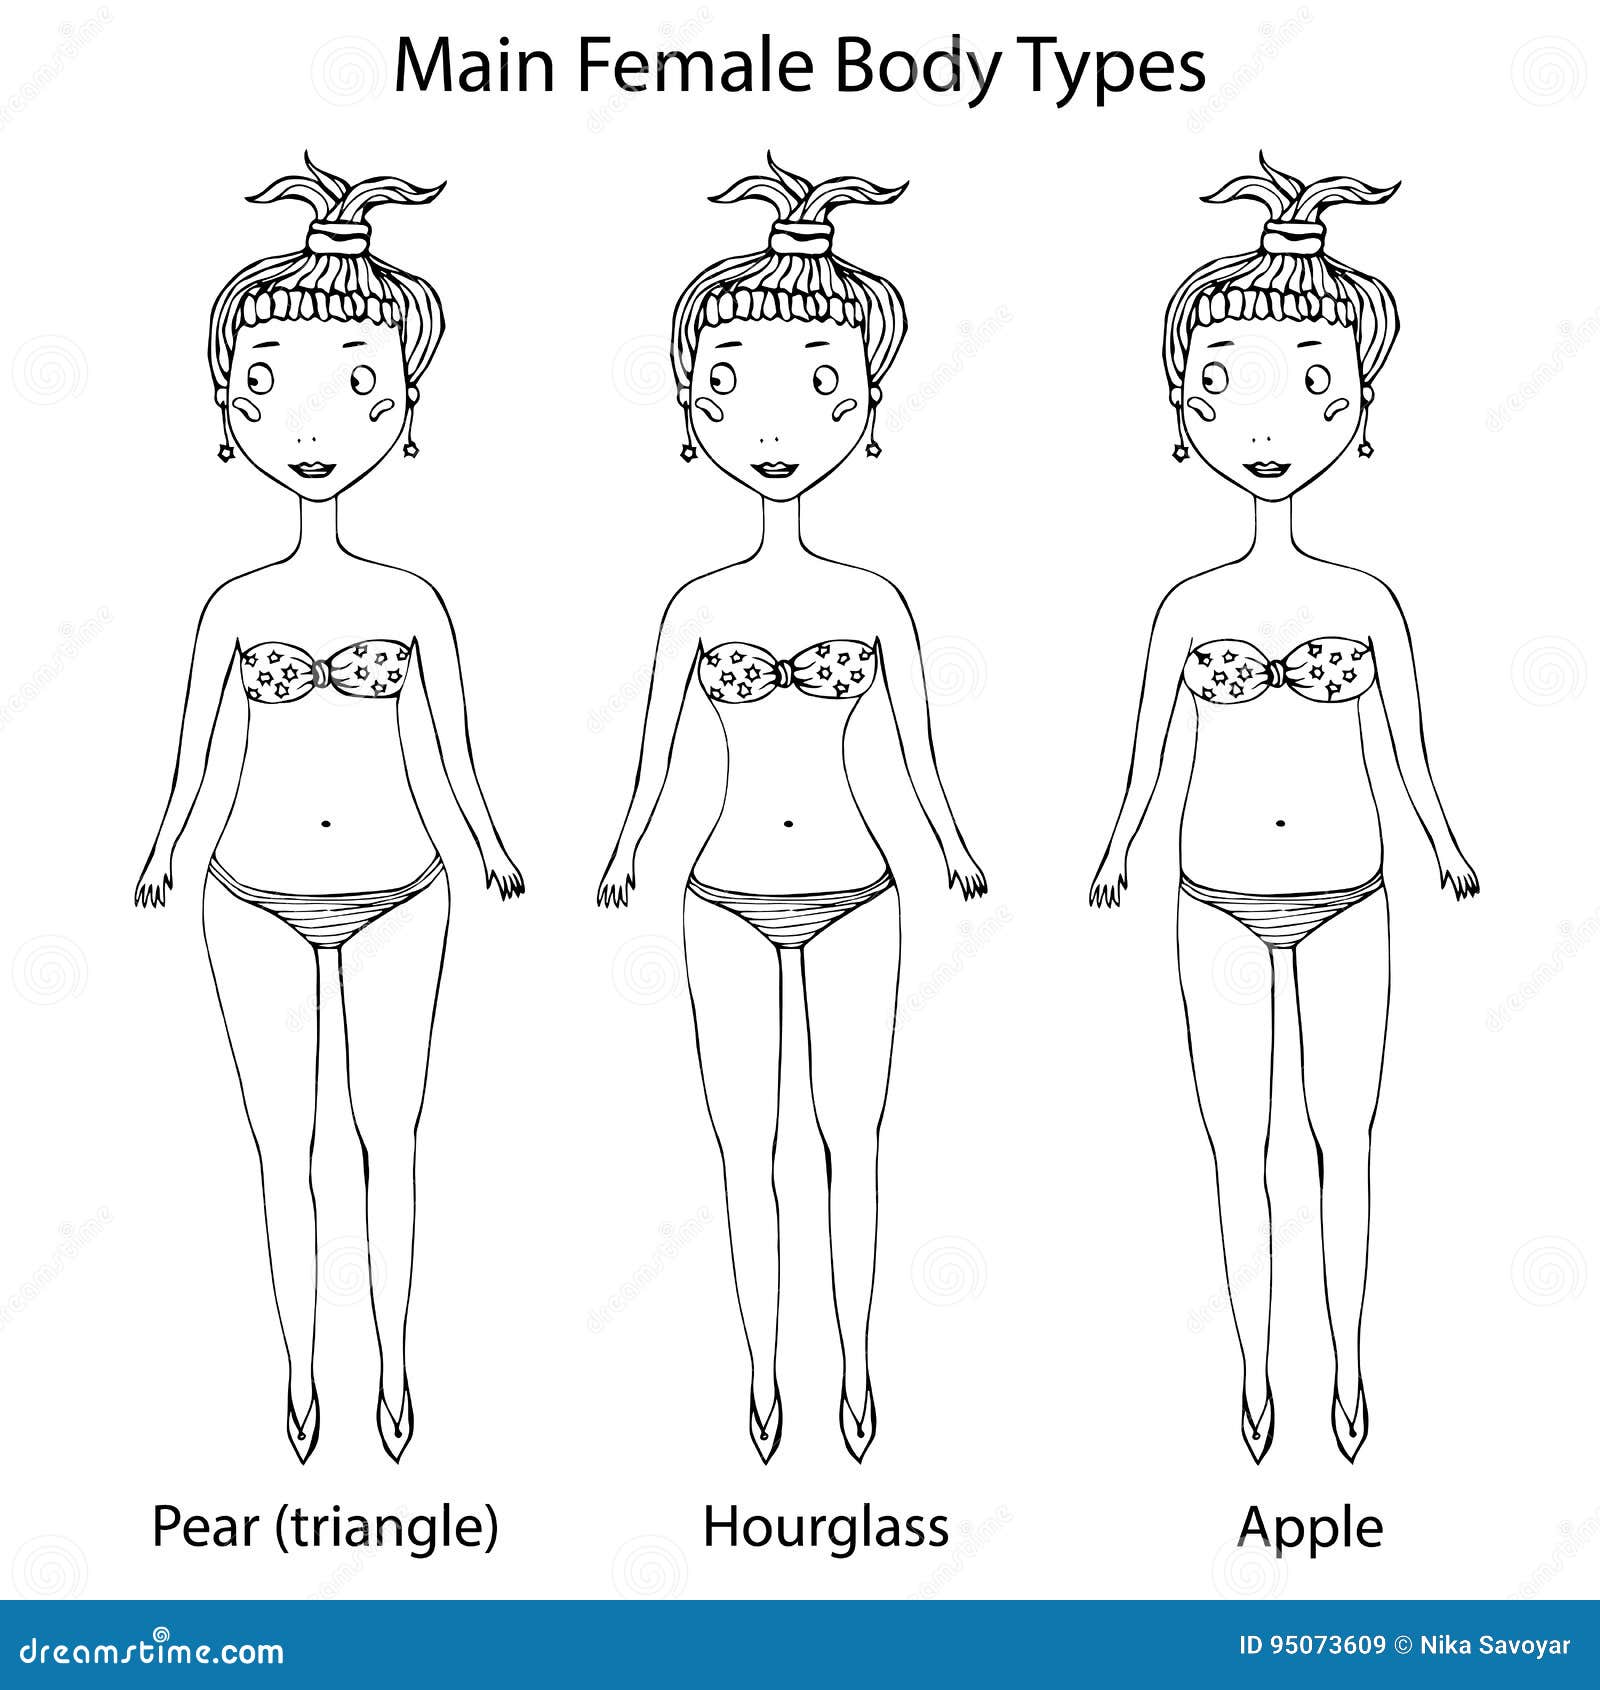 https://thumbs.dreamstime.com/z/main-female-body-shape-types-hourglass-pear-triangle-apple-realistic-hand-drawn-doodle-style-sketch-vector-illustration-95073609.jpg